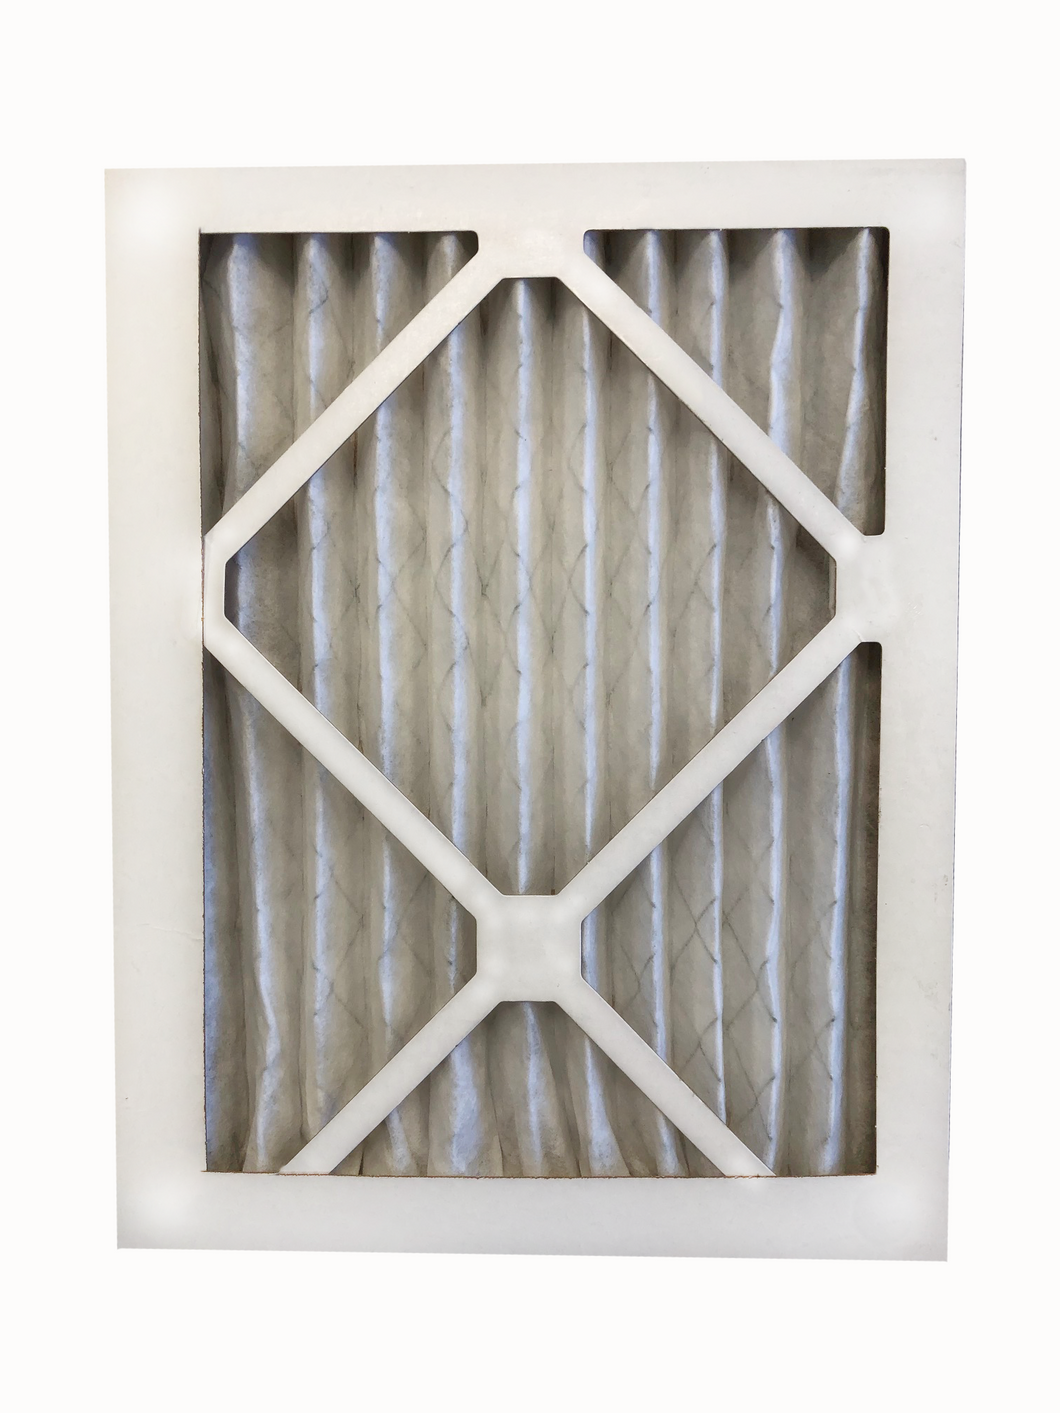 MERV 13 8 7/8x11 3/8x3/4 Pleated Replacement Filter for Compact70 Dehumidifier